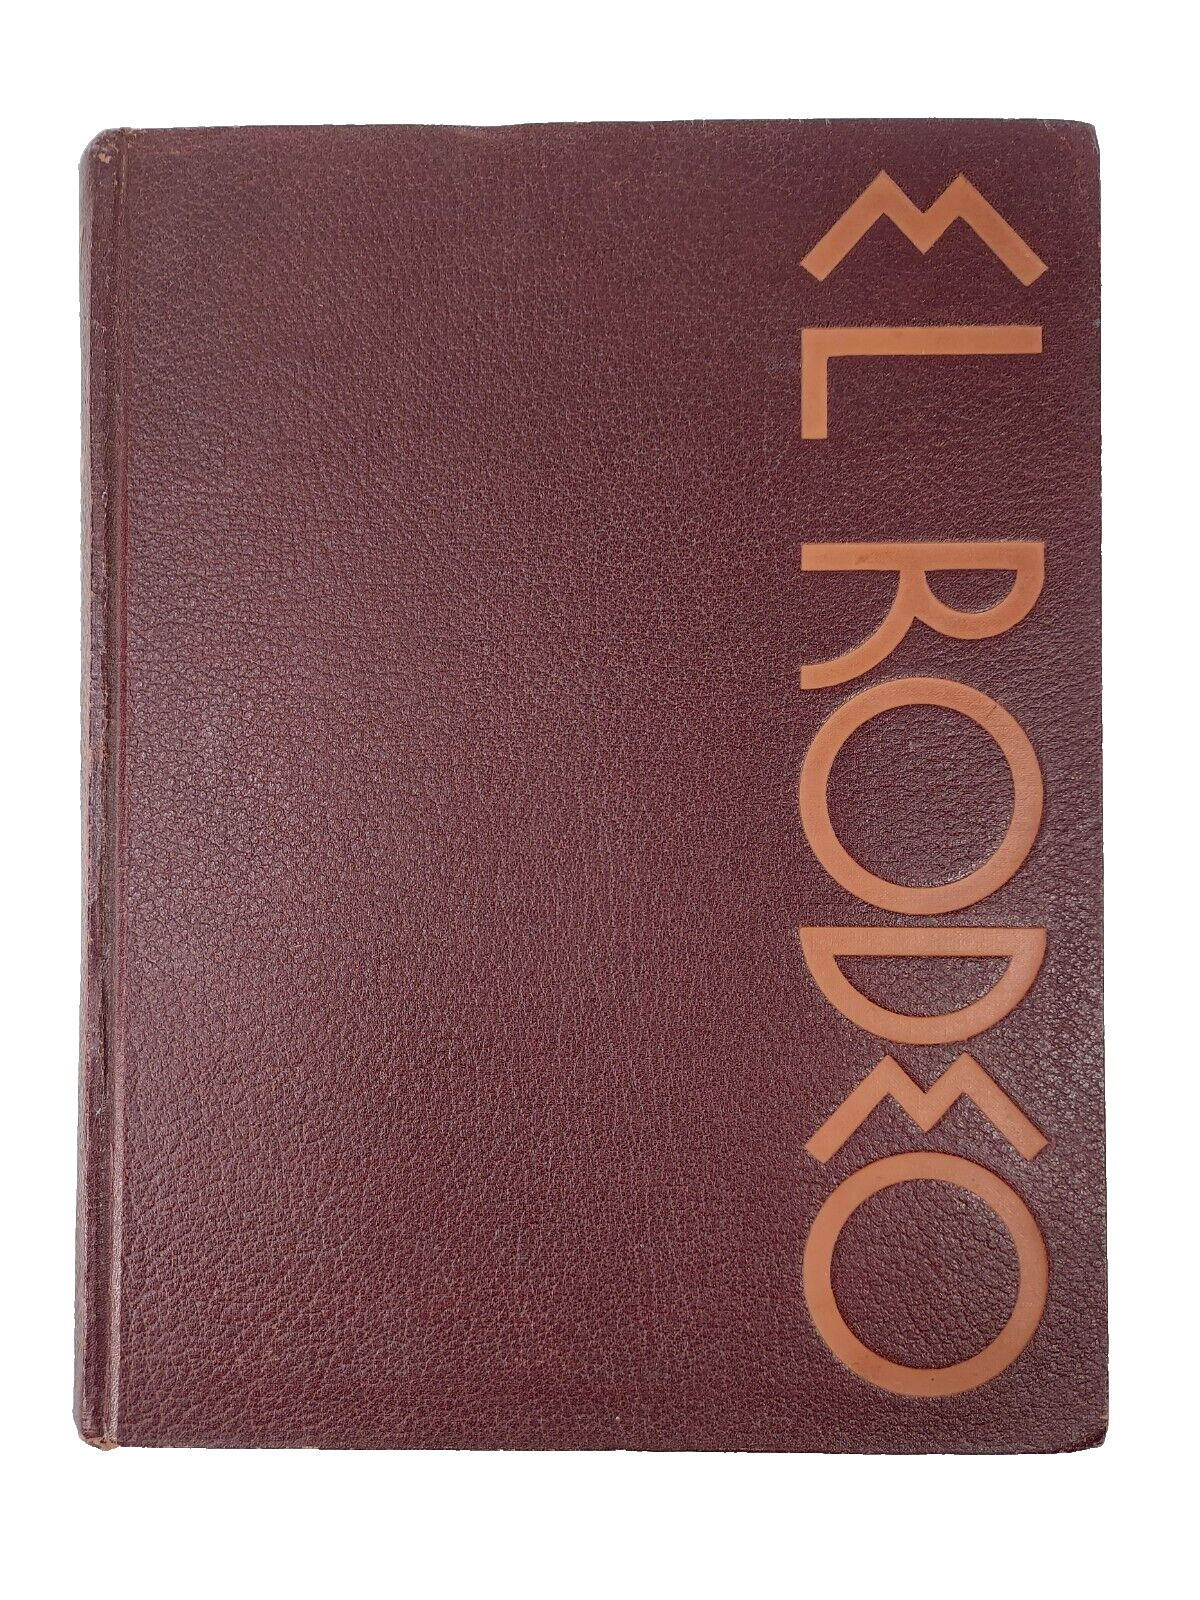 1937 Yearbook UNIVERSITY OF CALIFORNIA USC - EL RODEO - Trojans - Fight On